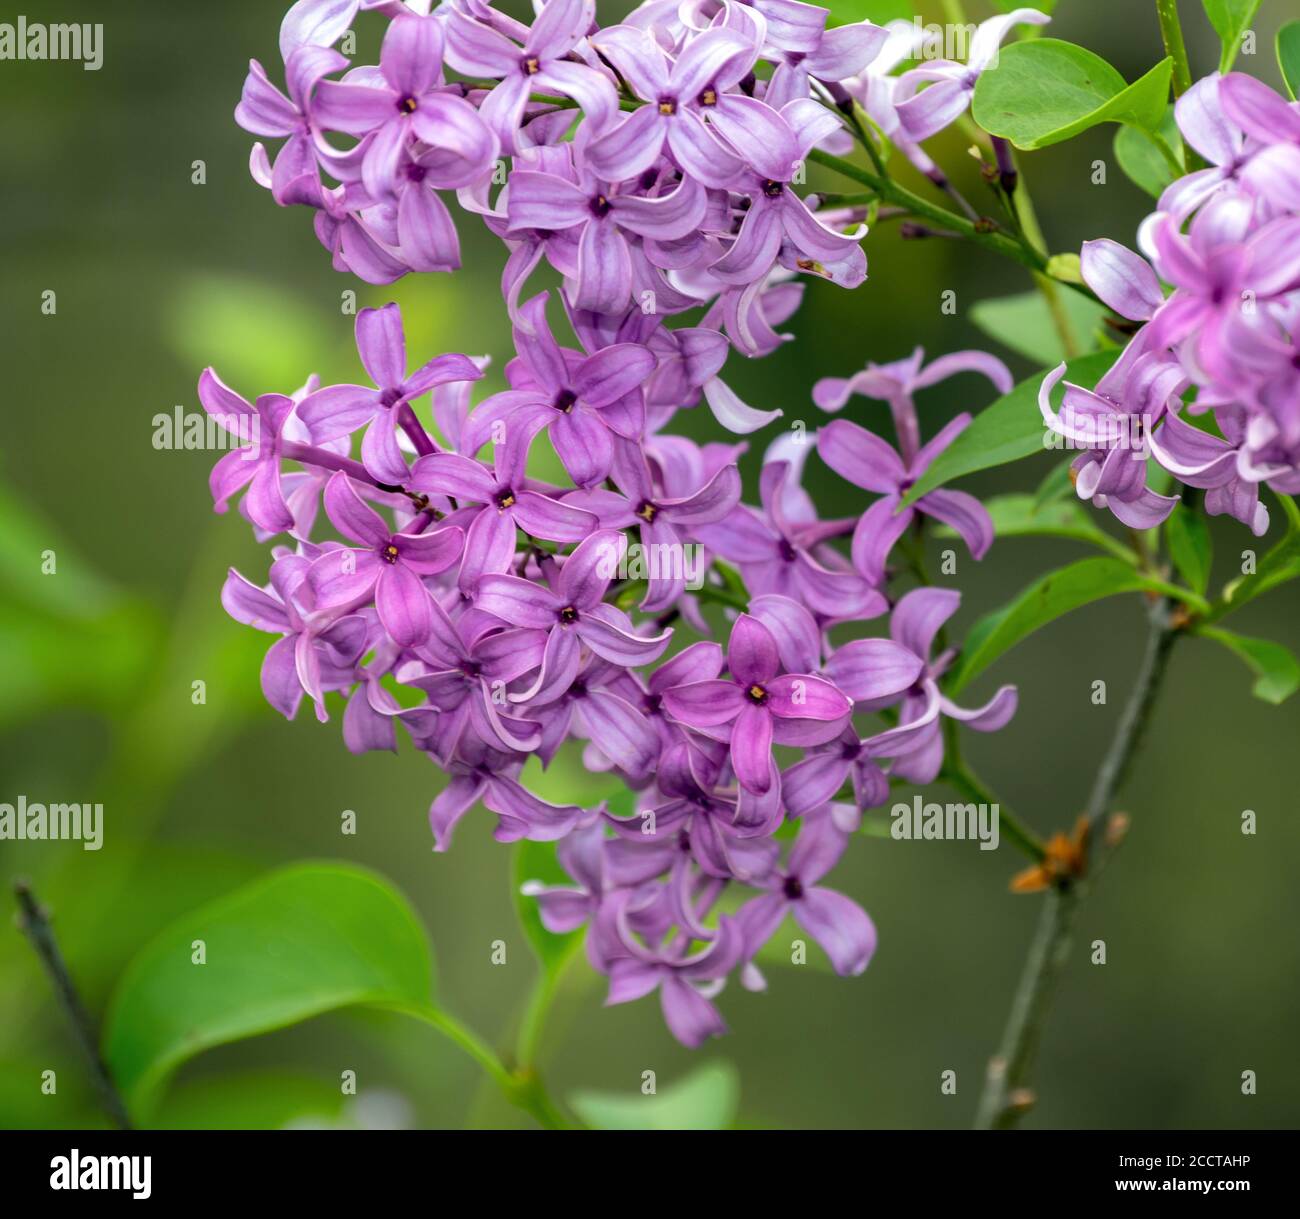 Delicate petals of a common lilac bush are soft and eye appealing against a defocused background welcoming spring time in Missouri. Stock Photo